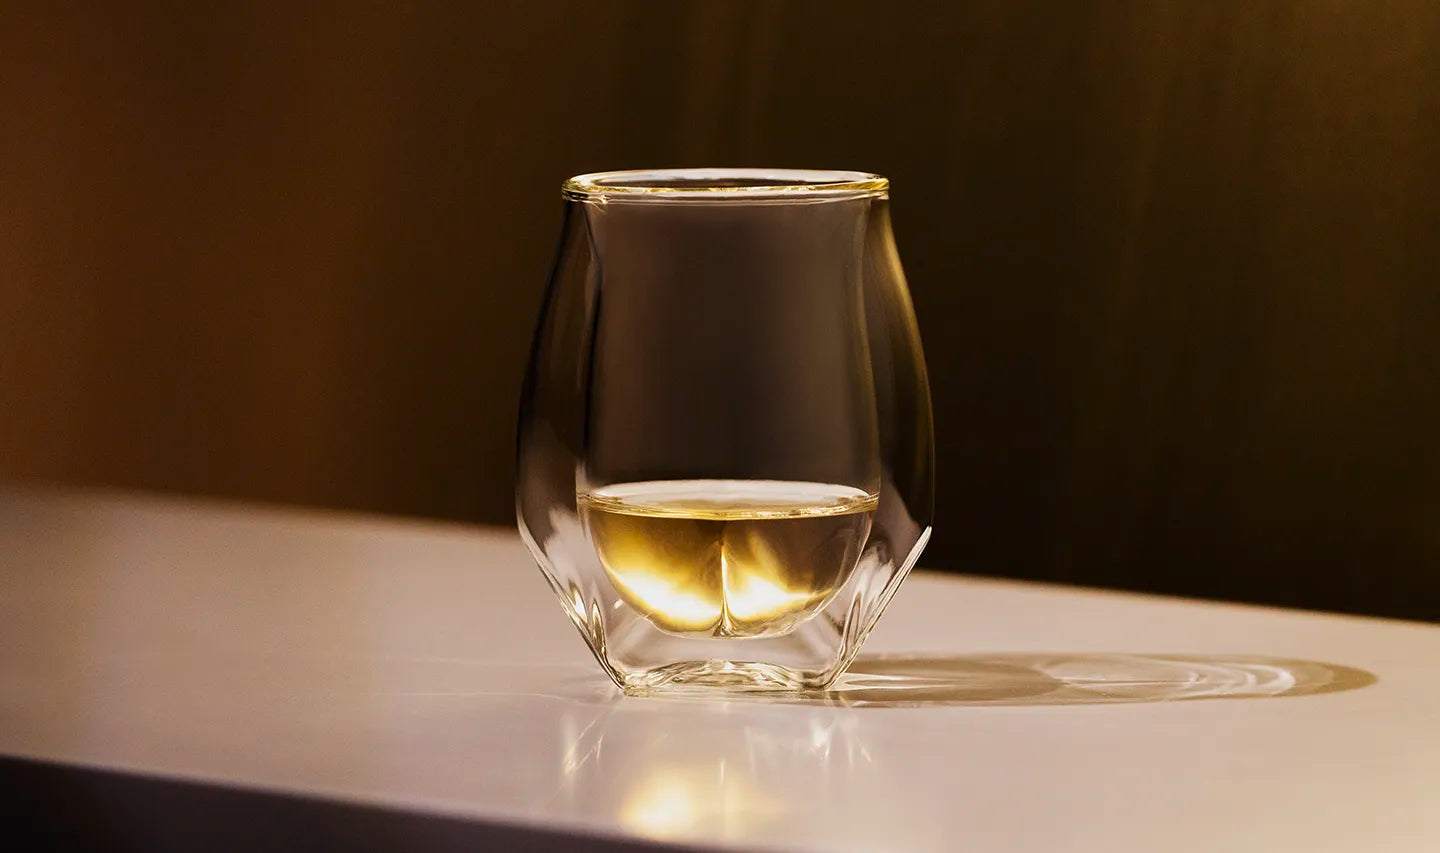 Our double-walled whisky glass filled with a golden yellow scotch enjoyed neat. 